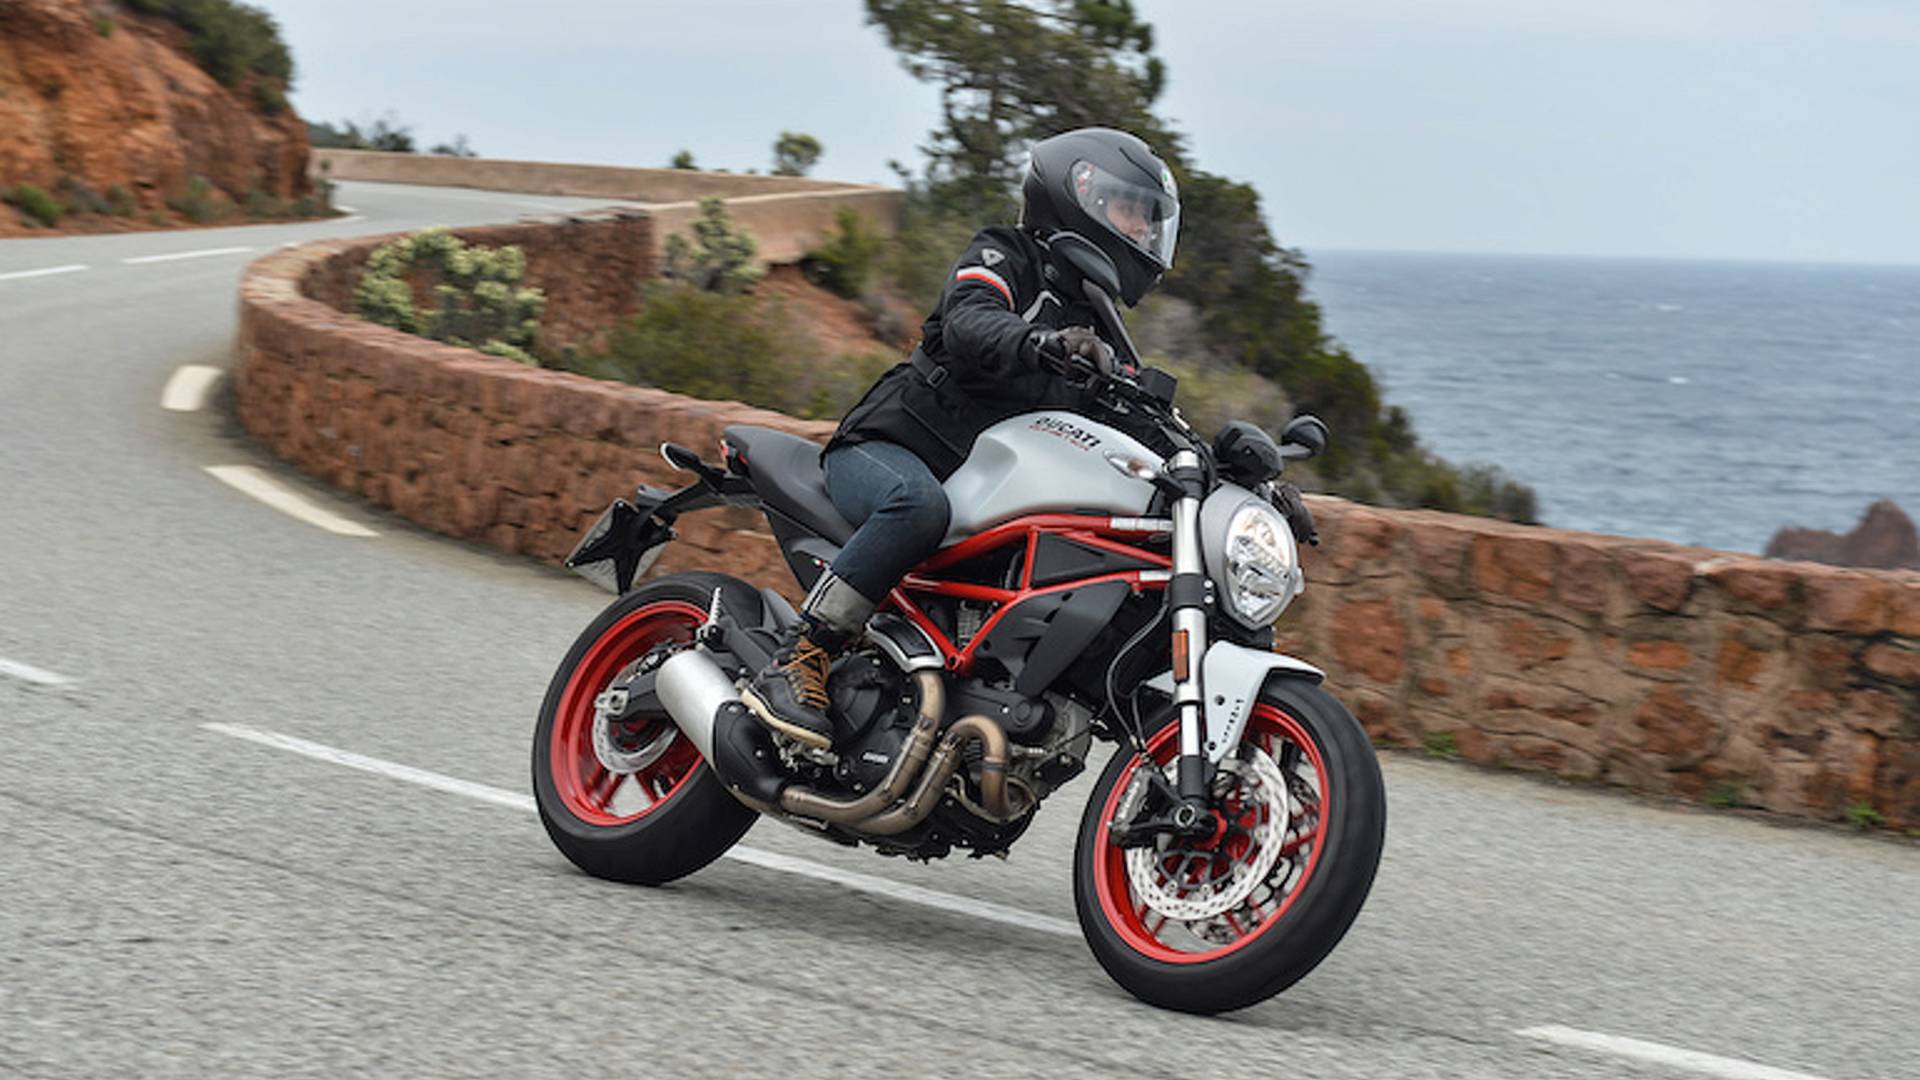 With New Monster 797 Ducati Errs on the Side of Cool